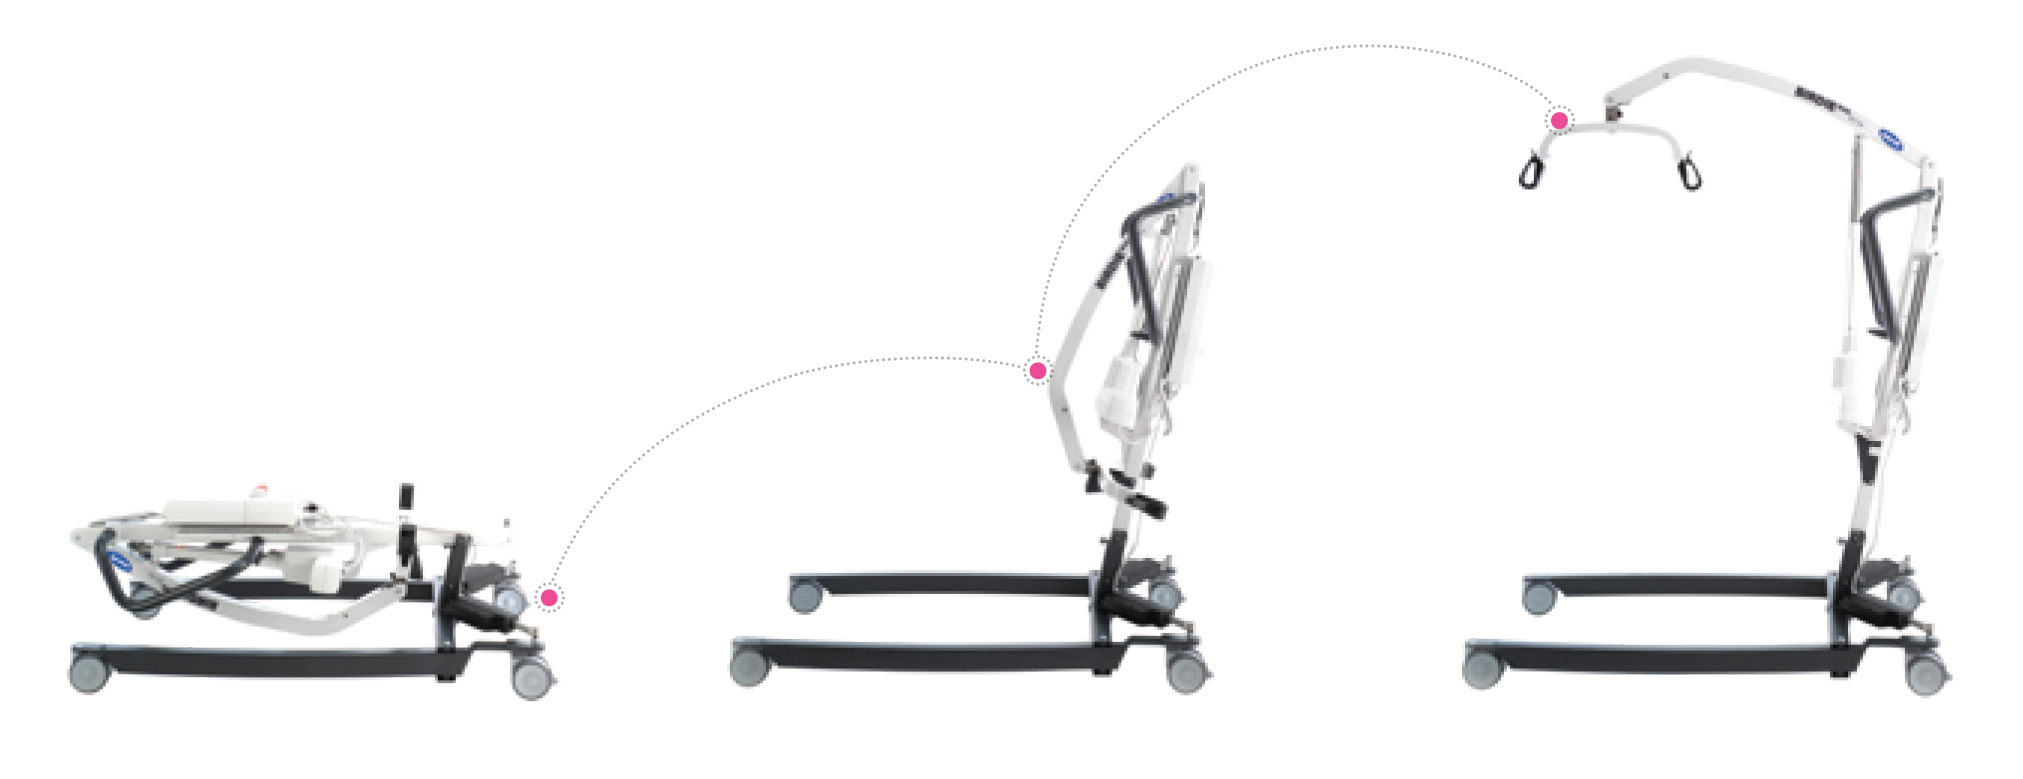 The Invacare Birdie Mobile Hoist can be assembled very quickly